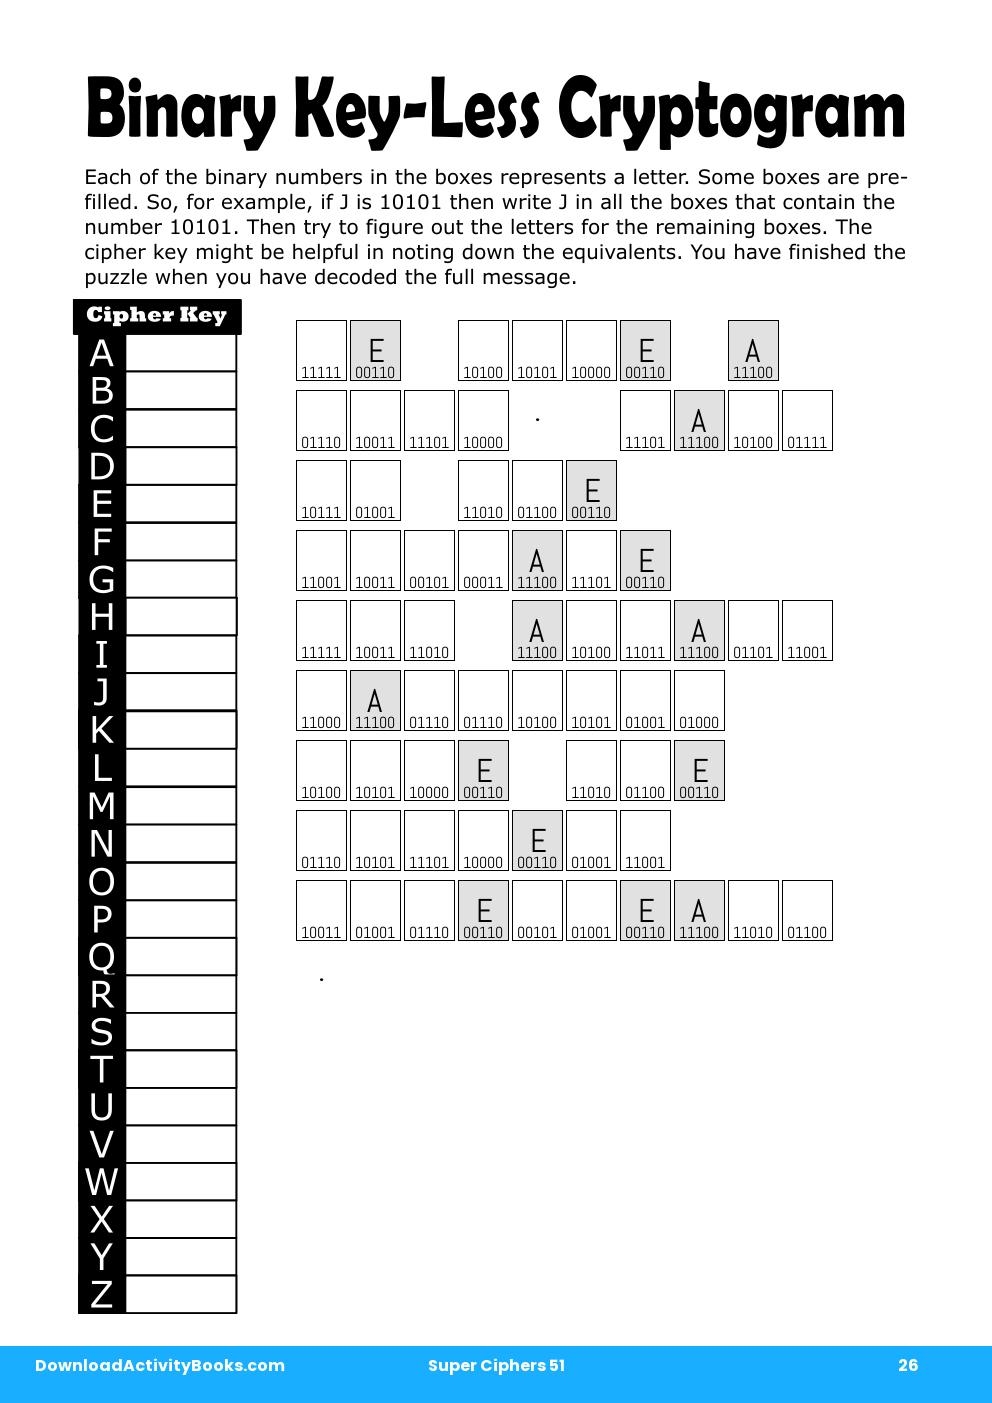 Binary Key-Less Cryptogram in Super Ciphers 51